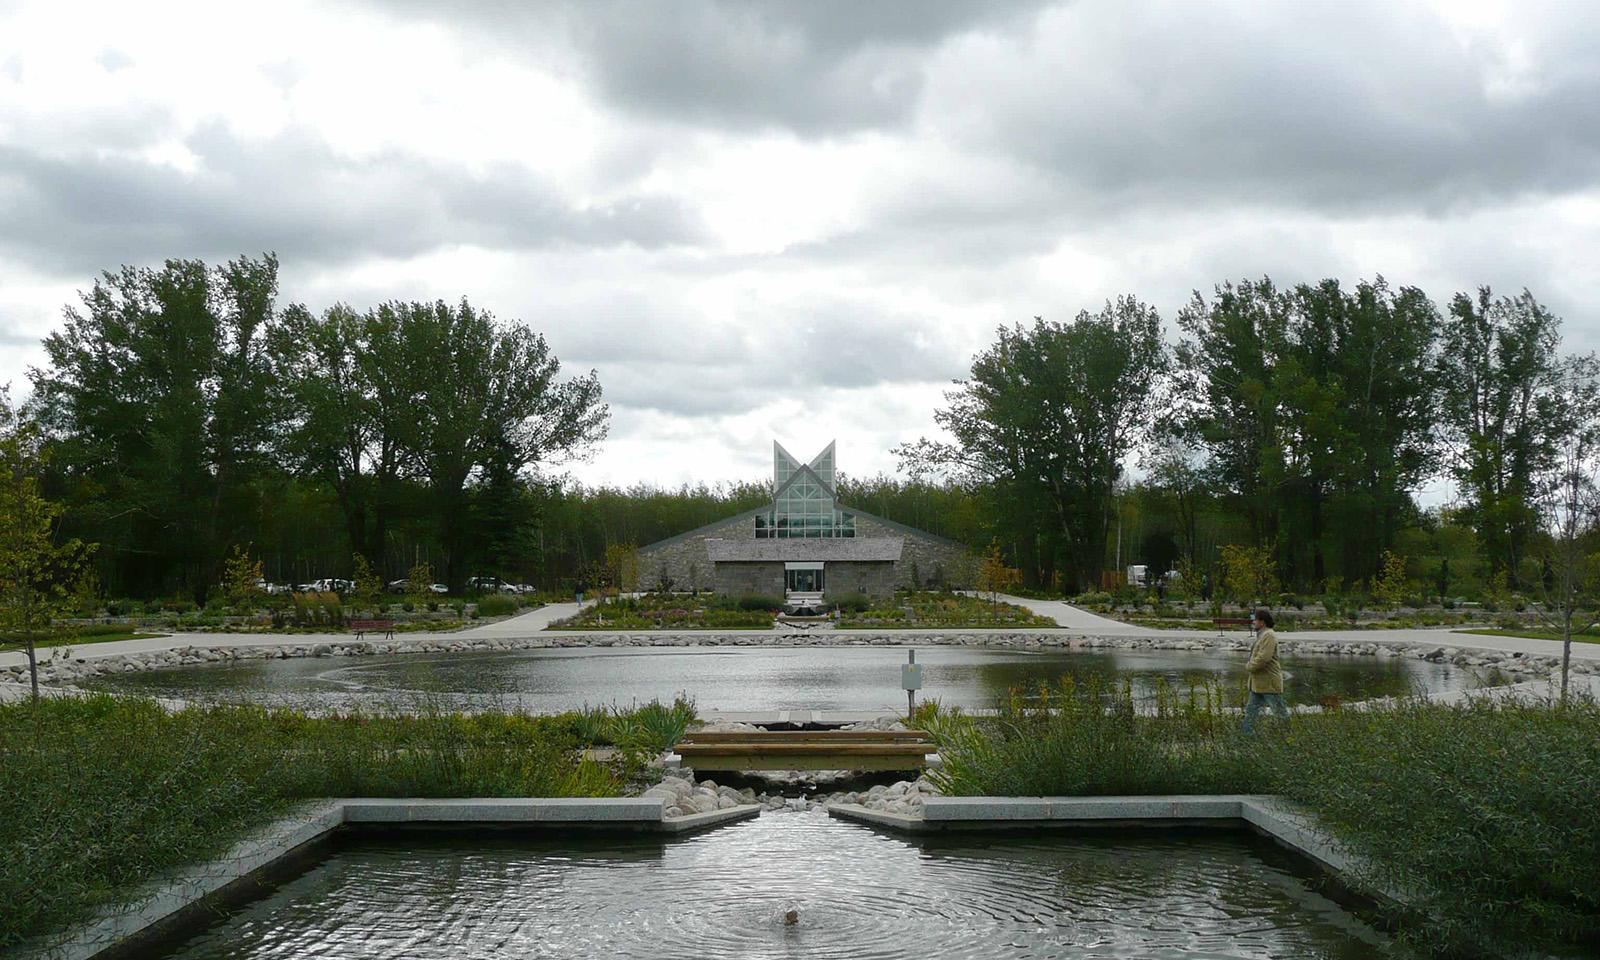 International Peace Garden. Looking across walkways and water feature to the Interpretive Centre in the far distance.